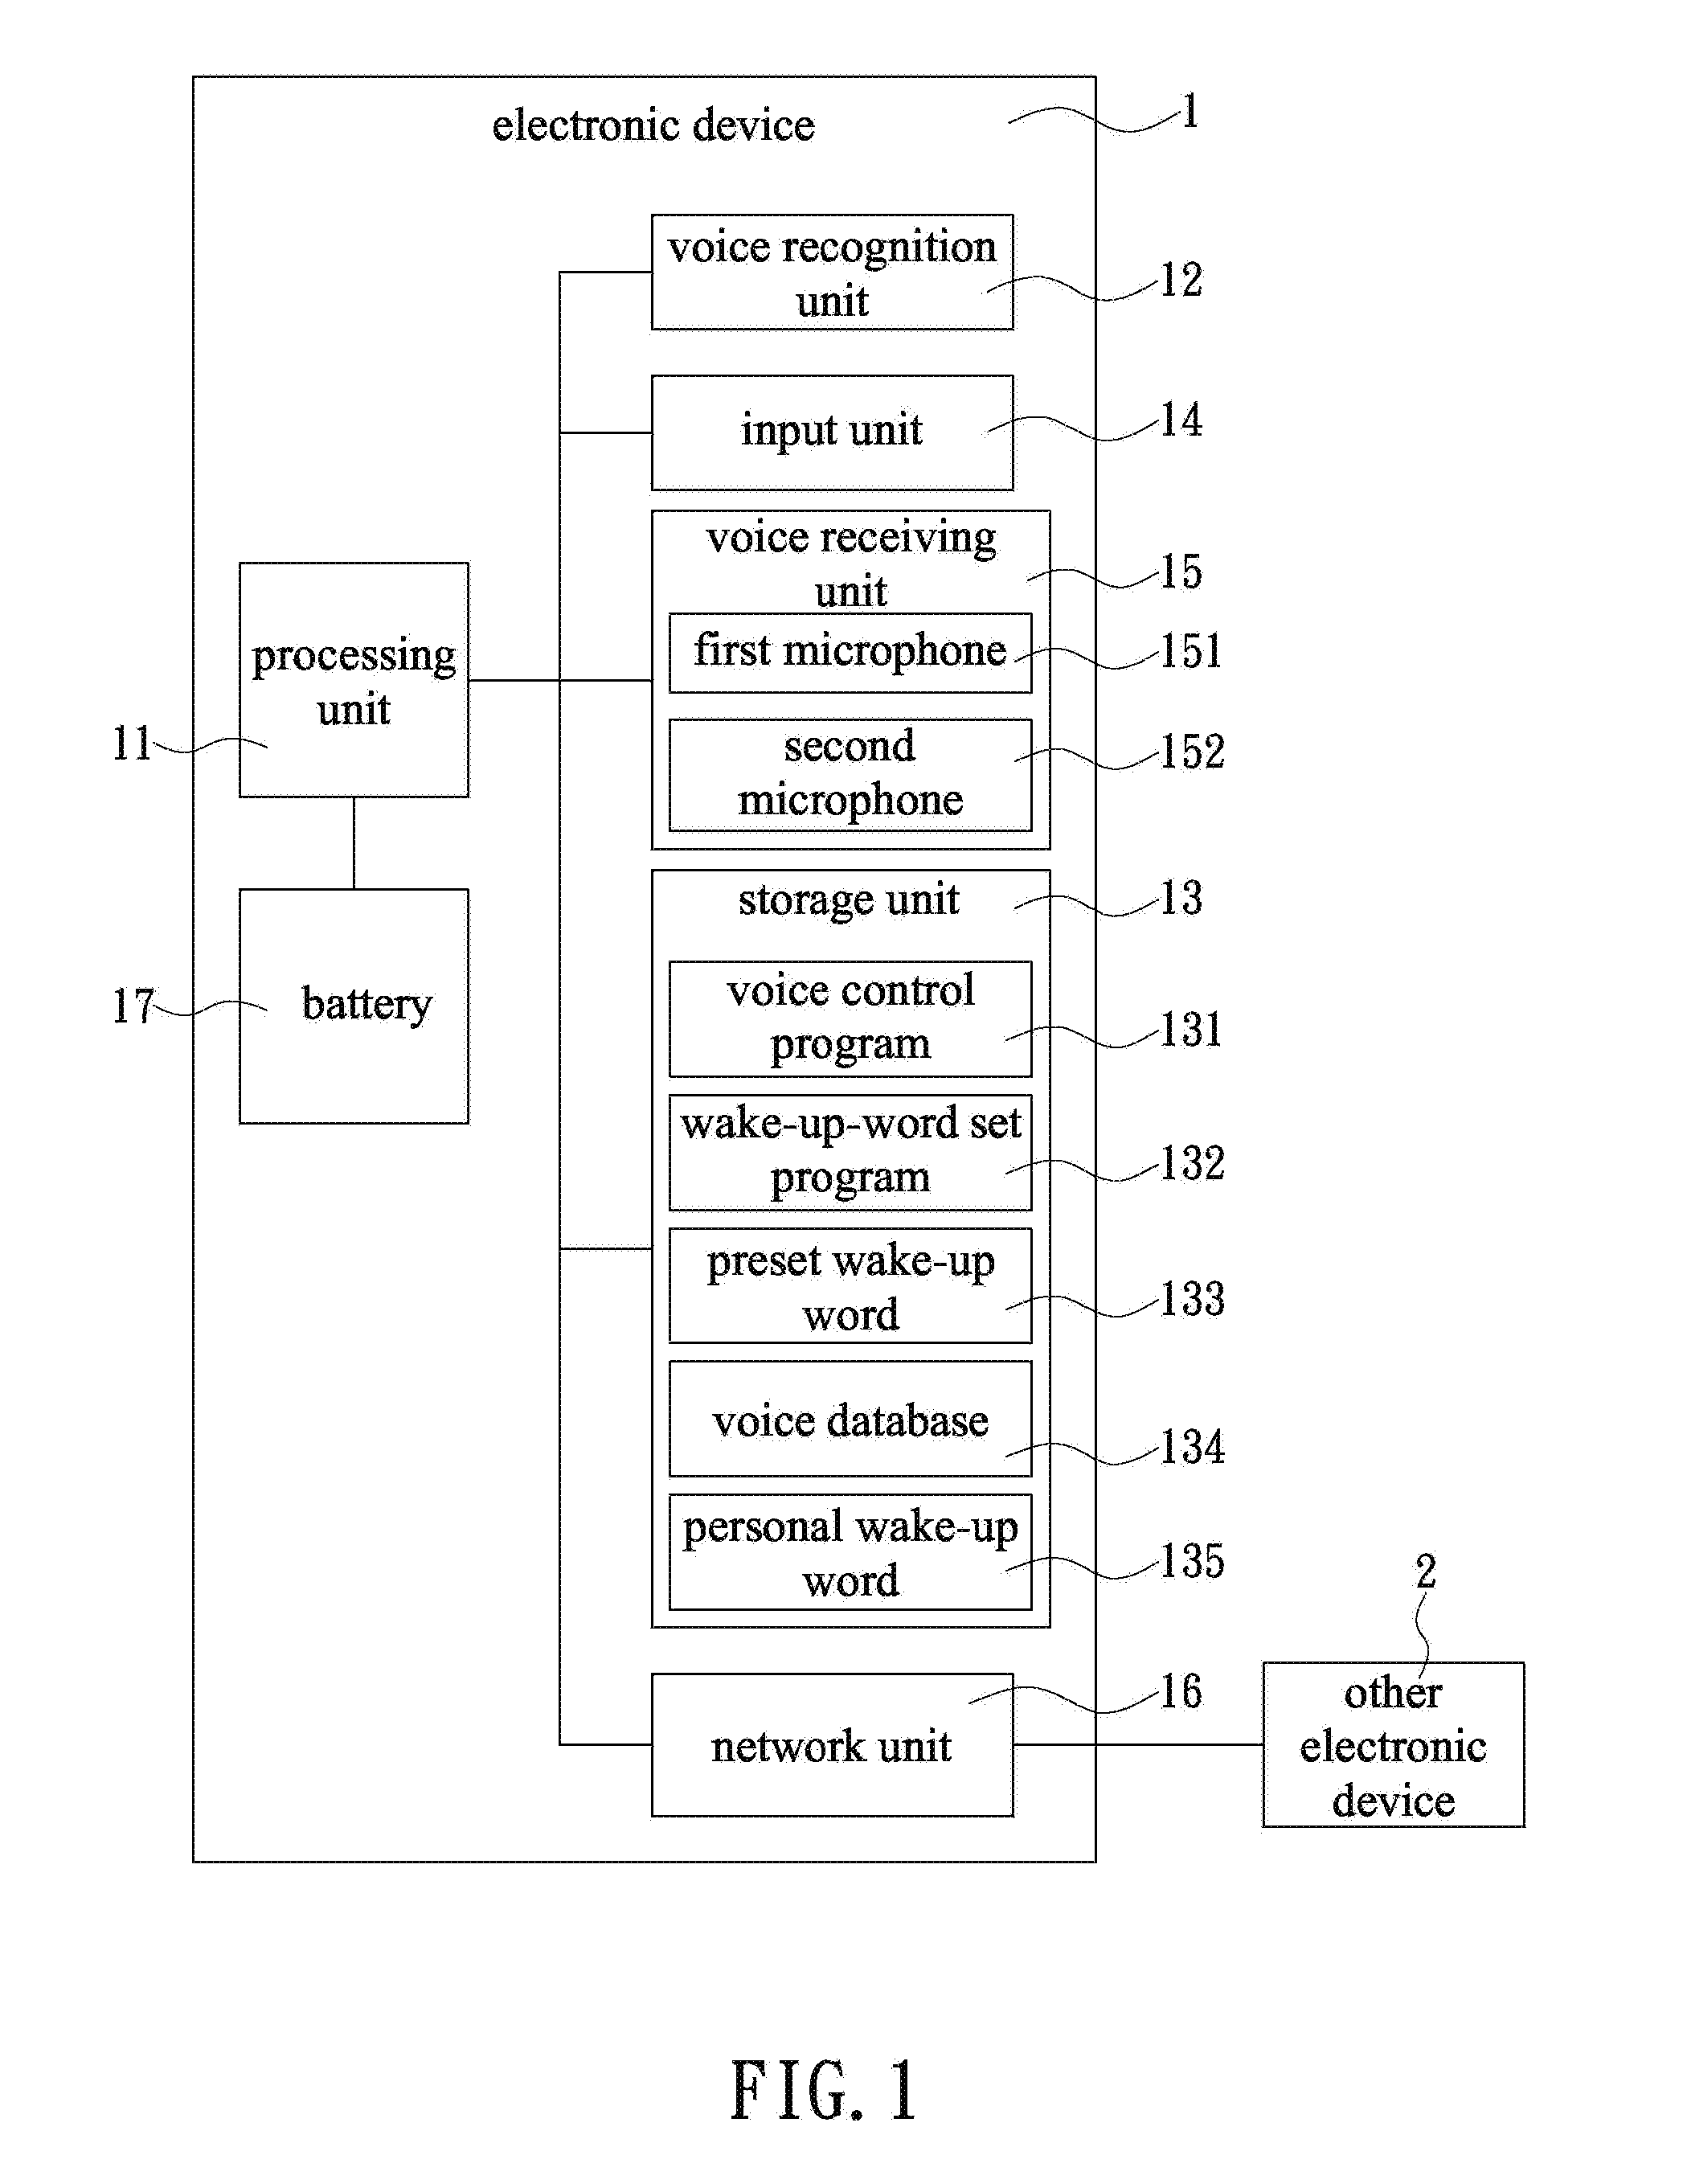 Method of setting personal wake-up word by text for voice control